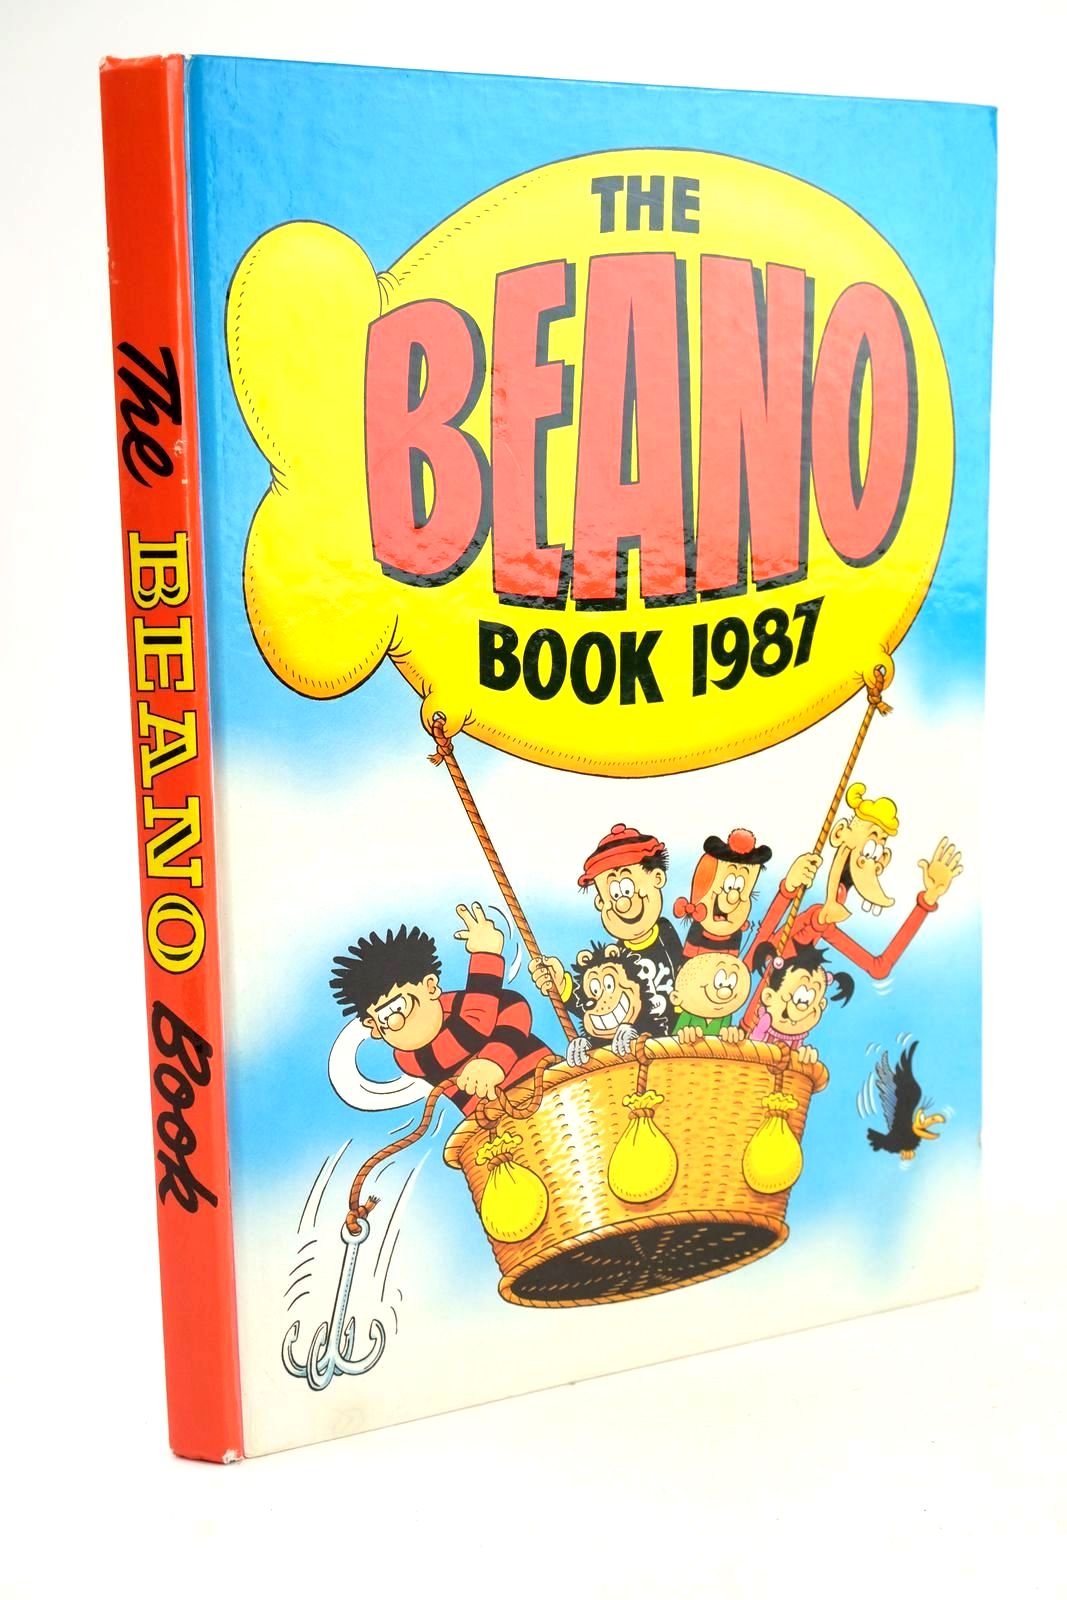 Photo of THE BEANO BOOK 1987 published by D.C. Thomson &amp; Co Ltd. (STOCK CODE: 1326174)  for sale by Stella & Rose's Books